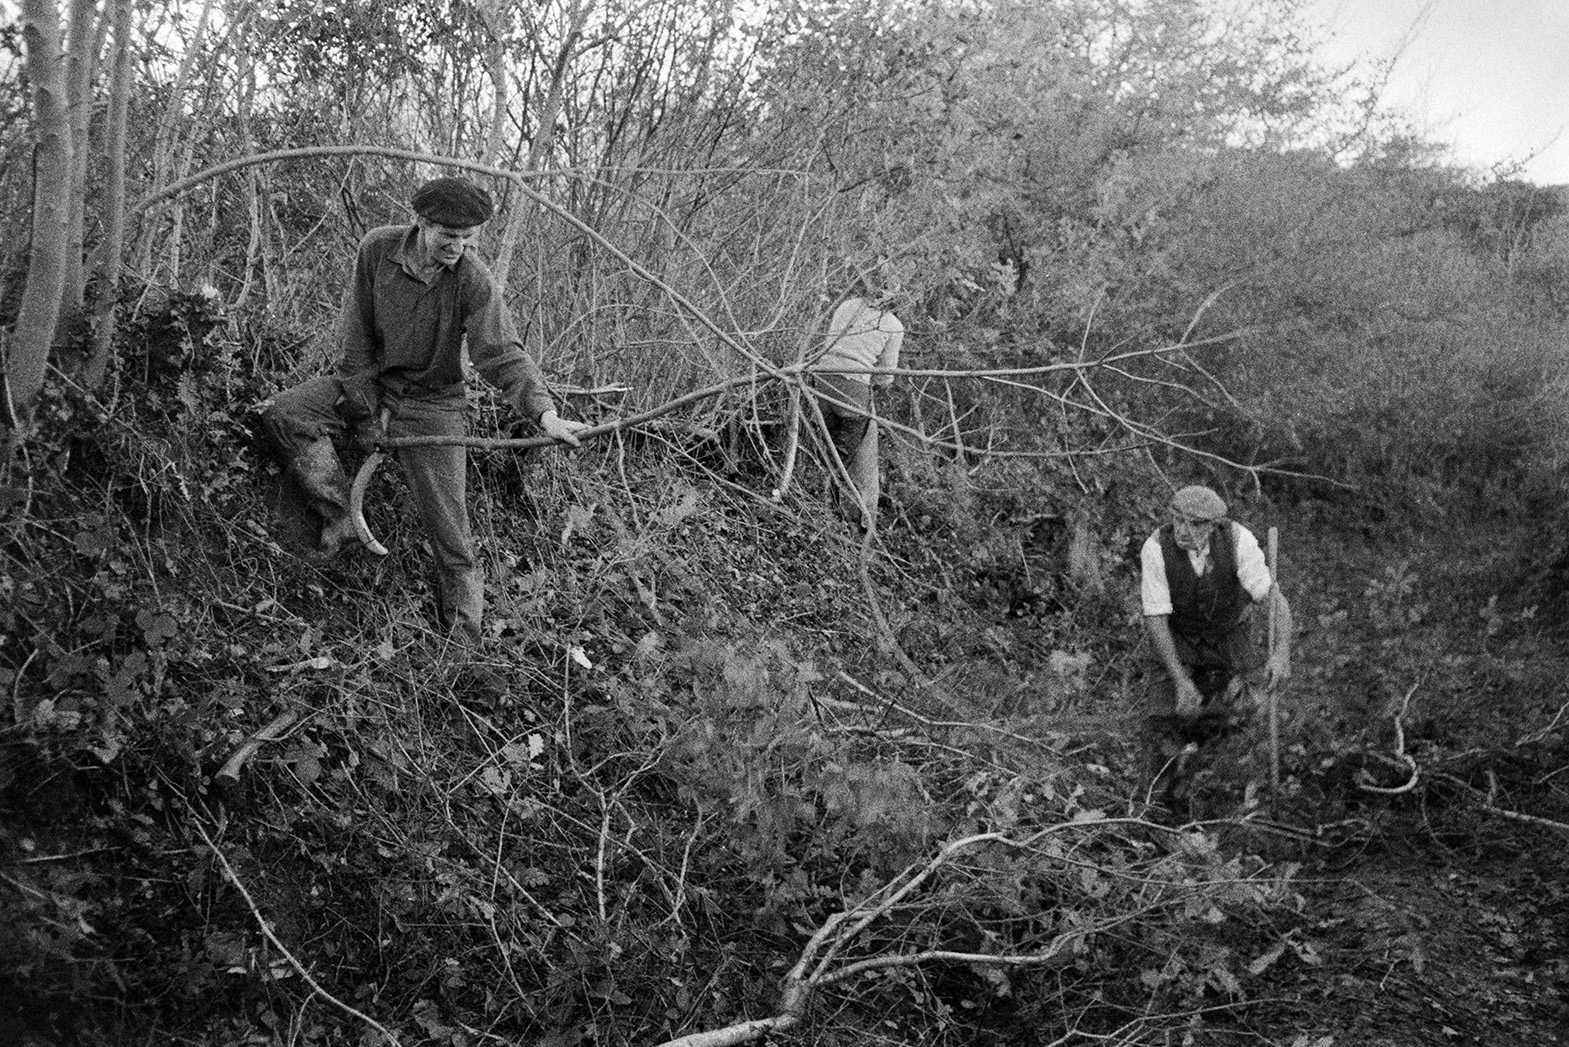 Ivor Bourne, Derek Bright and Tom Hooper (left to right) trimming a hedge, by hand with bill hooks, in Green Lane, Beaford.